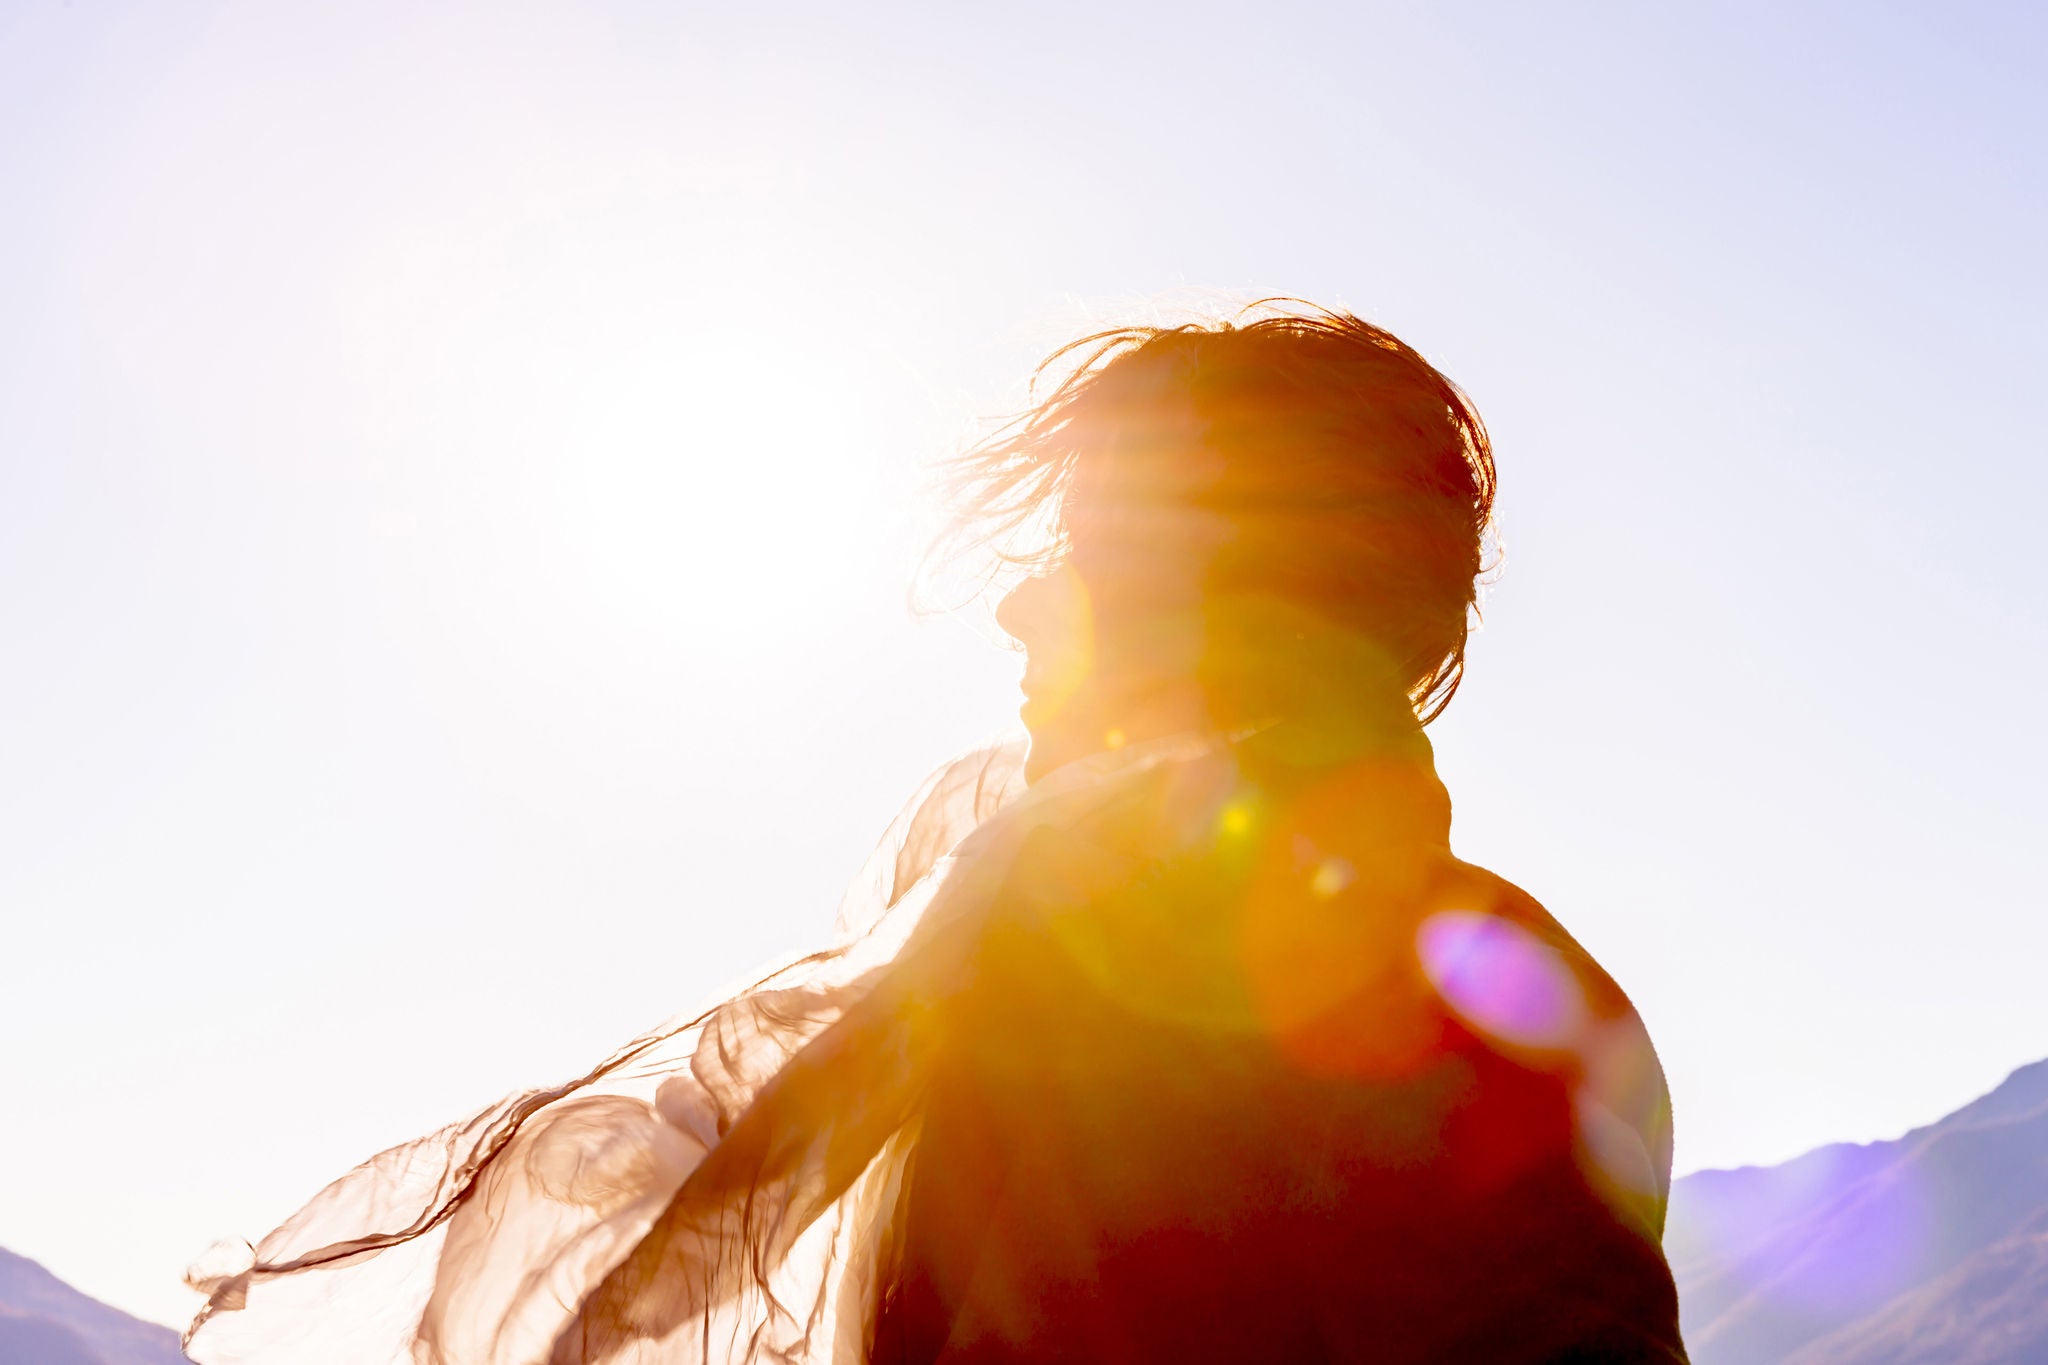 Woman with moving hair and scarf in sunlight in a windy day